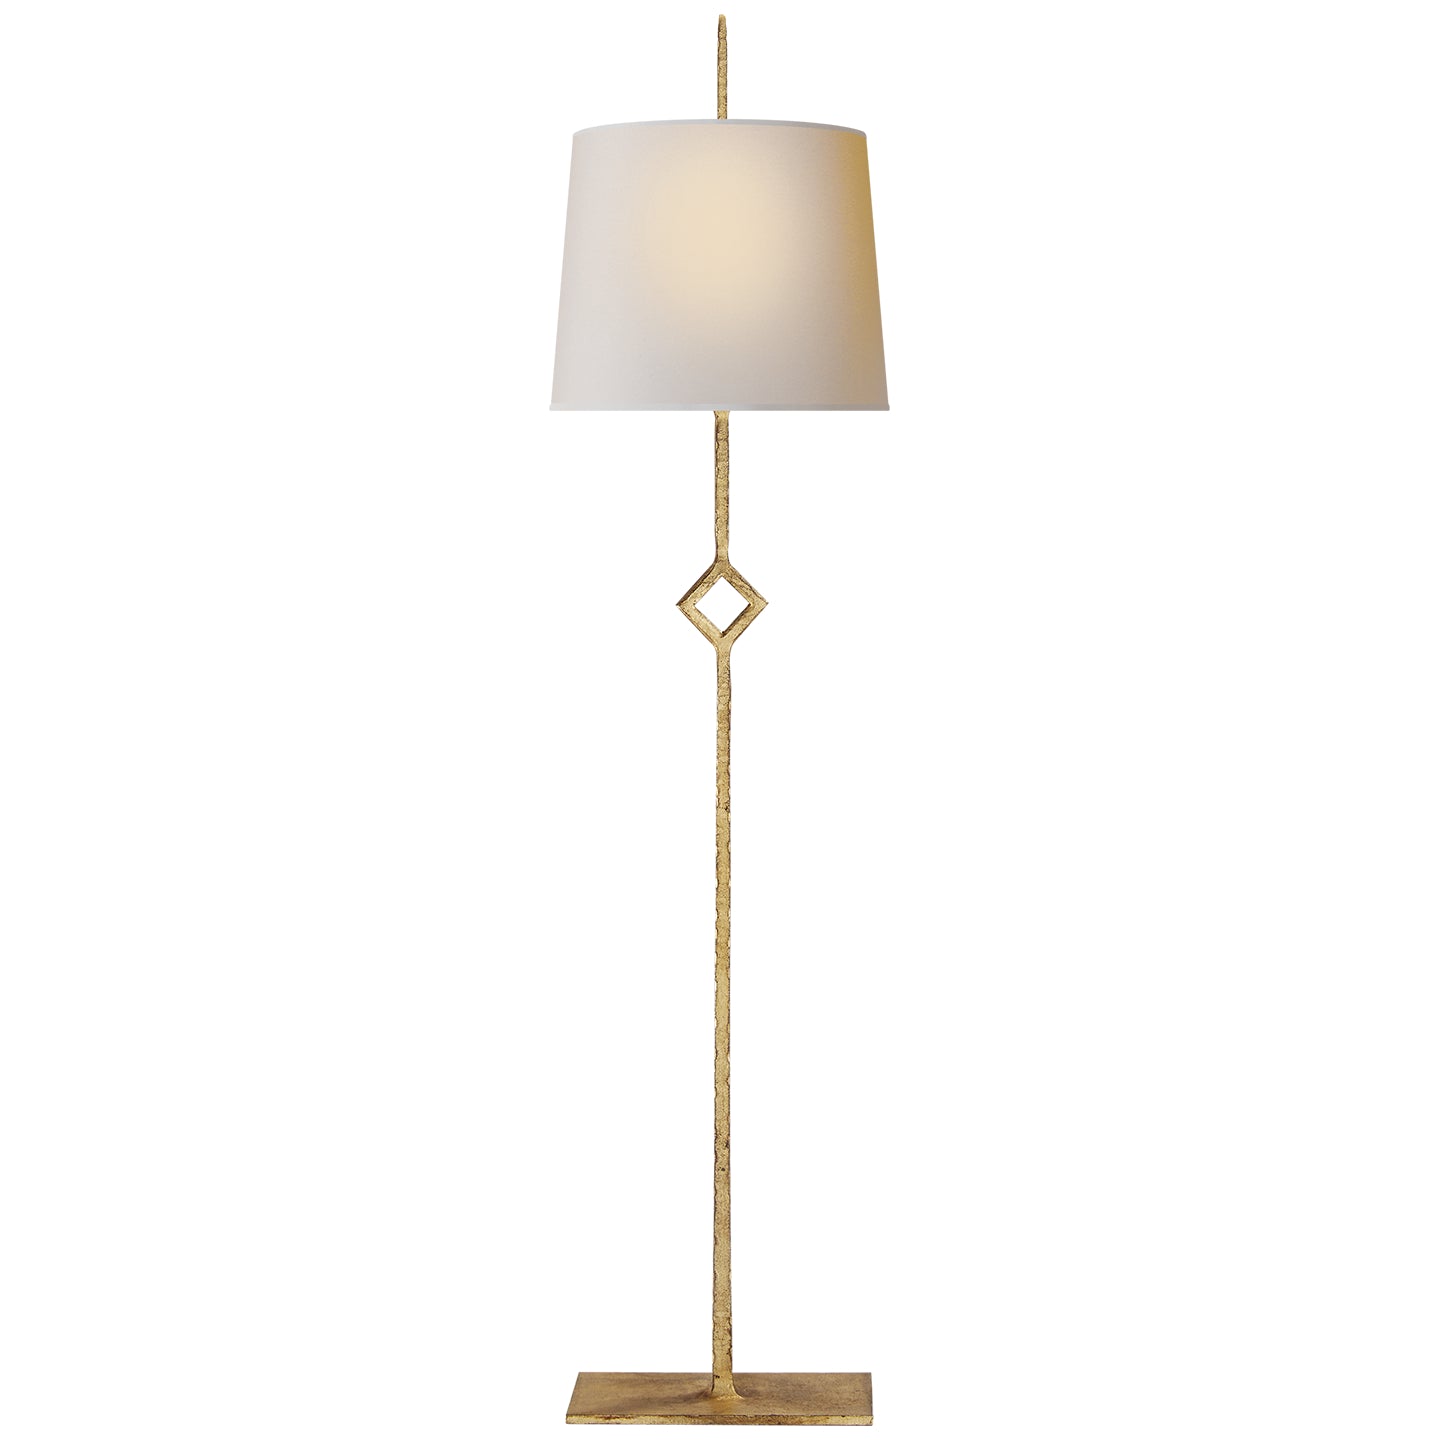 Load image into Gallery viewer, Visual Comfort Signature - S 3407GI-NP - One Light Table Lamp - Cranston - Gilded Iron
